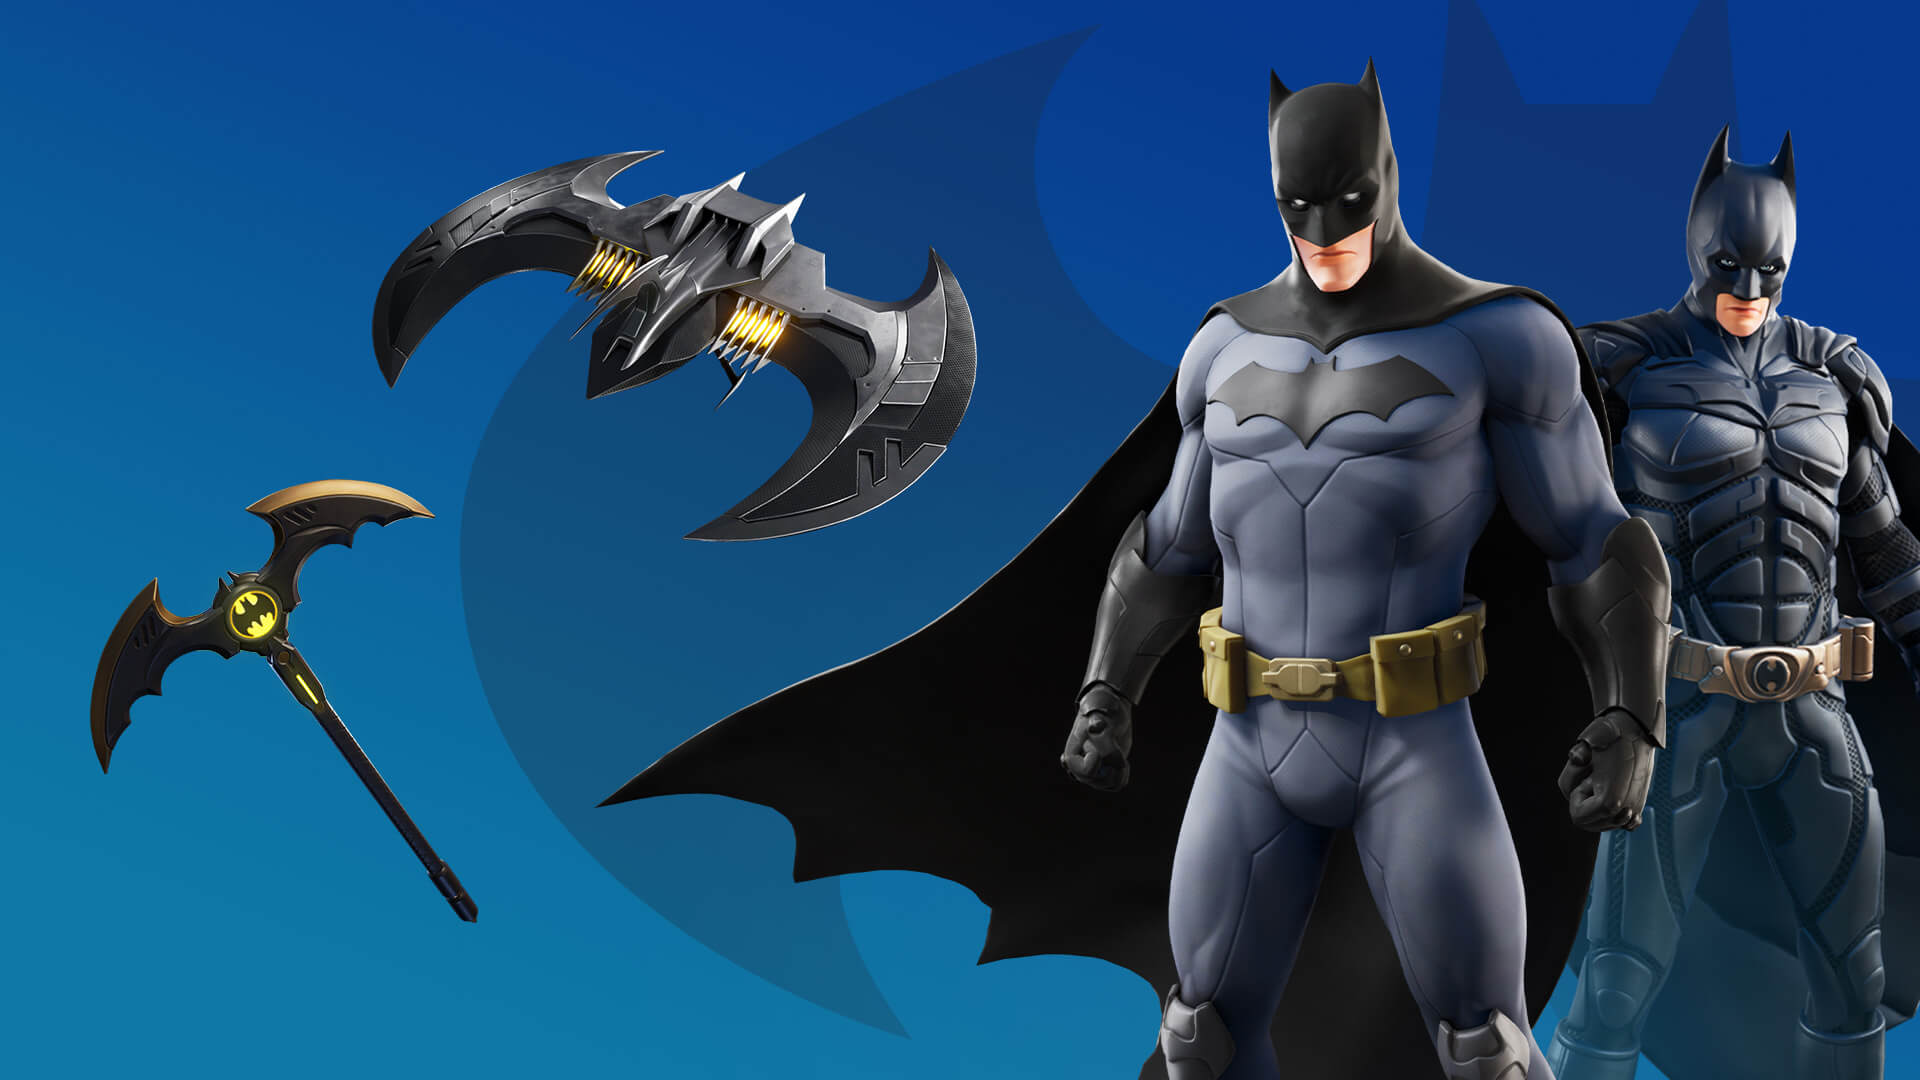 Batman returns to Fortnite with a Dose of Gotham City Heroism